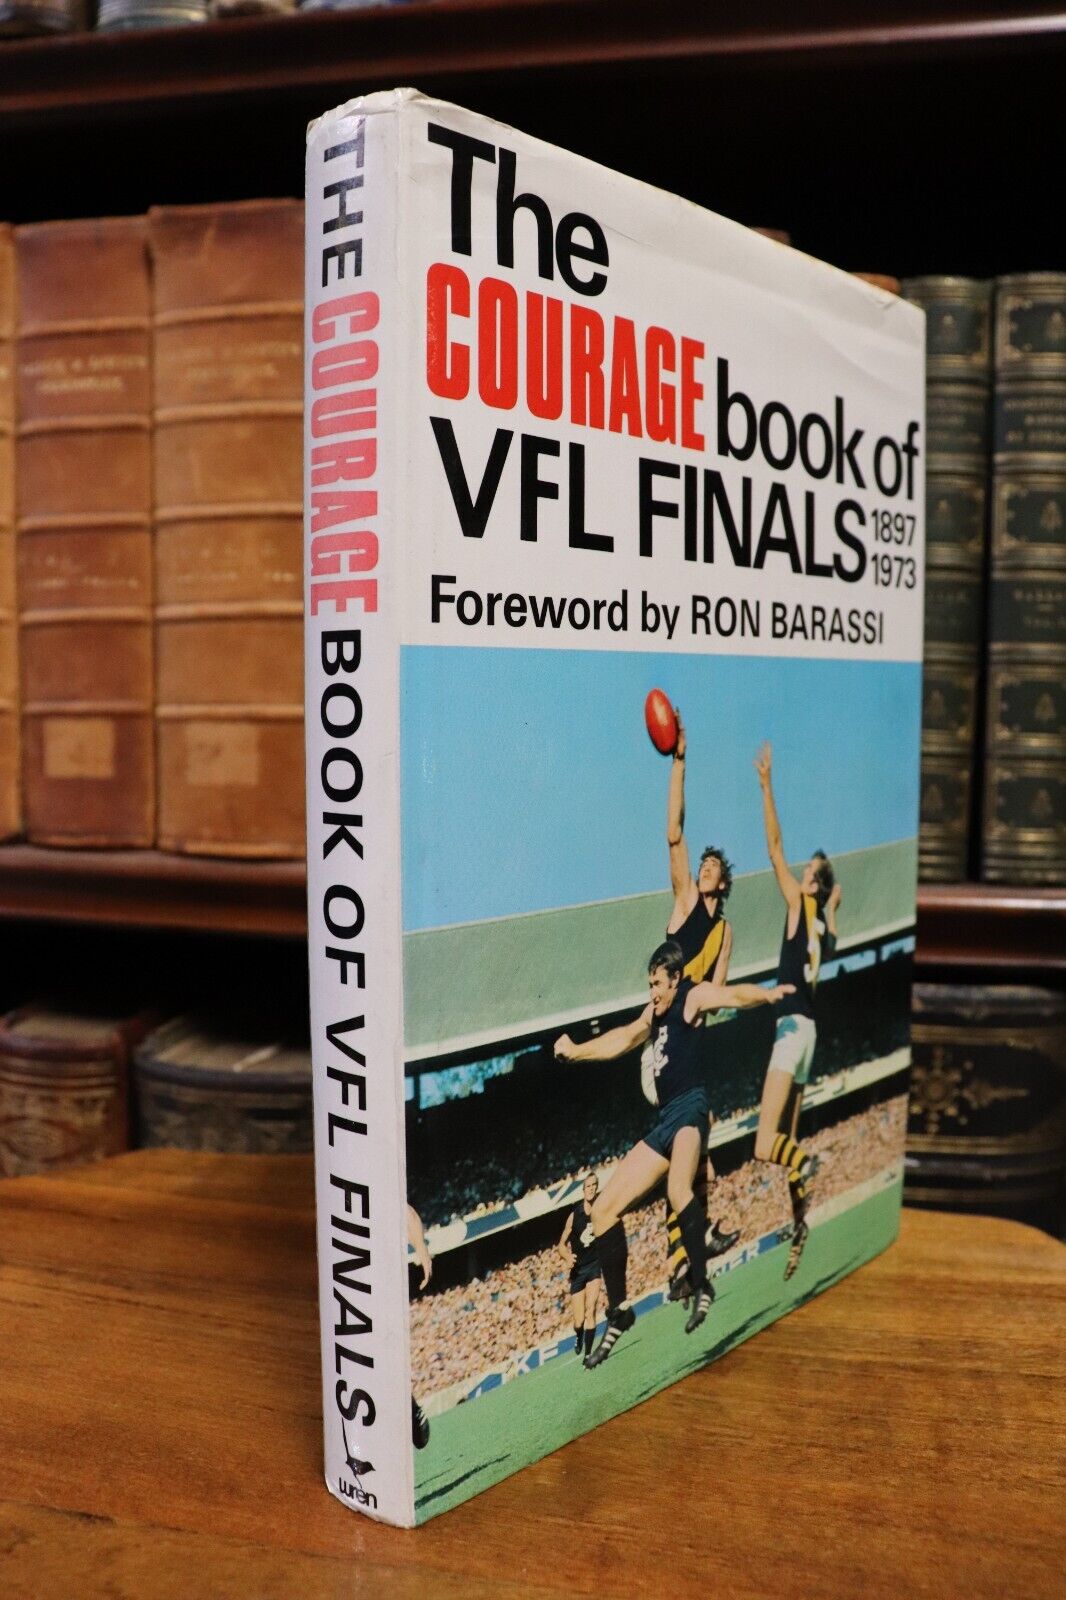 The Courage Book Of VFL Finals - 1974 - VFL & AFL Sports History Book